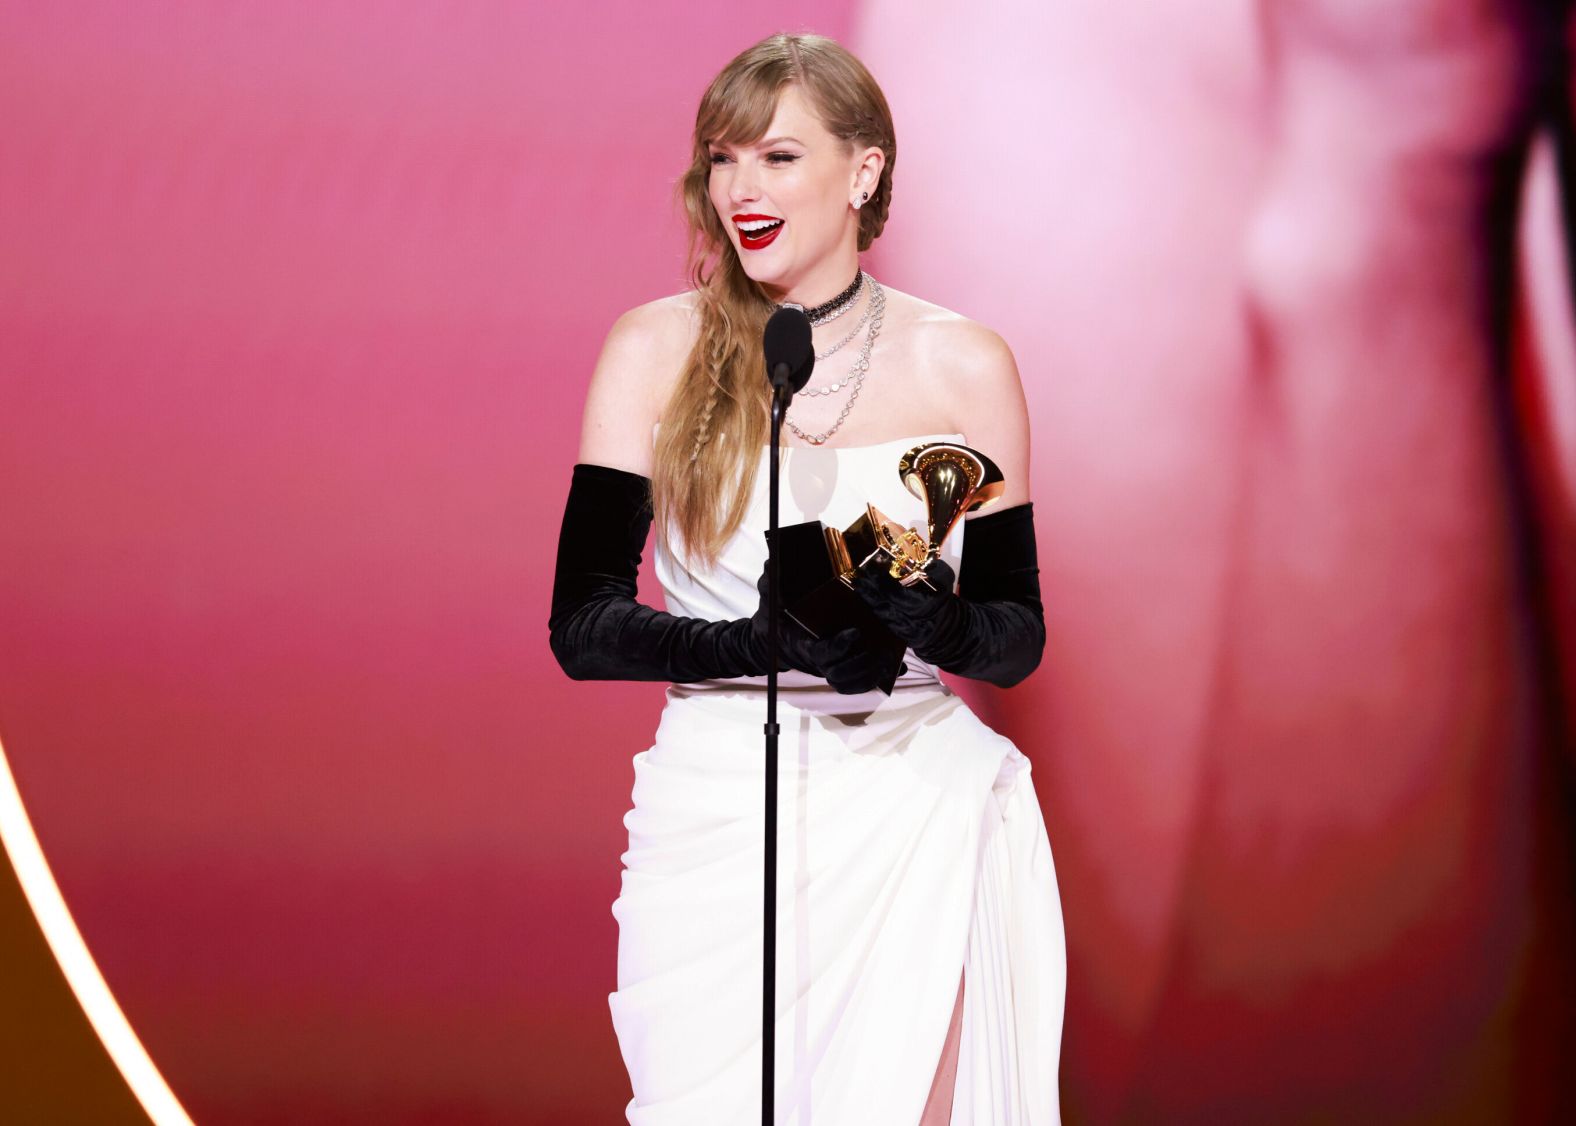 Swift accepts the Grammy for best pop vocal album ("Midnights"). During her acceptance speech, <a href="index.php?page=&url=https%3A%2F%2Fwww.cnn.com%2F2024%2F02%2F04%2Fentertainment%2Ftaylor-swift-tortured-poets-department">she revealed that her next album</a>, "The Tortured Poets Department," will be released in April.